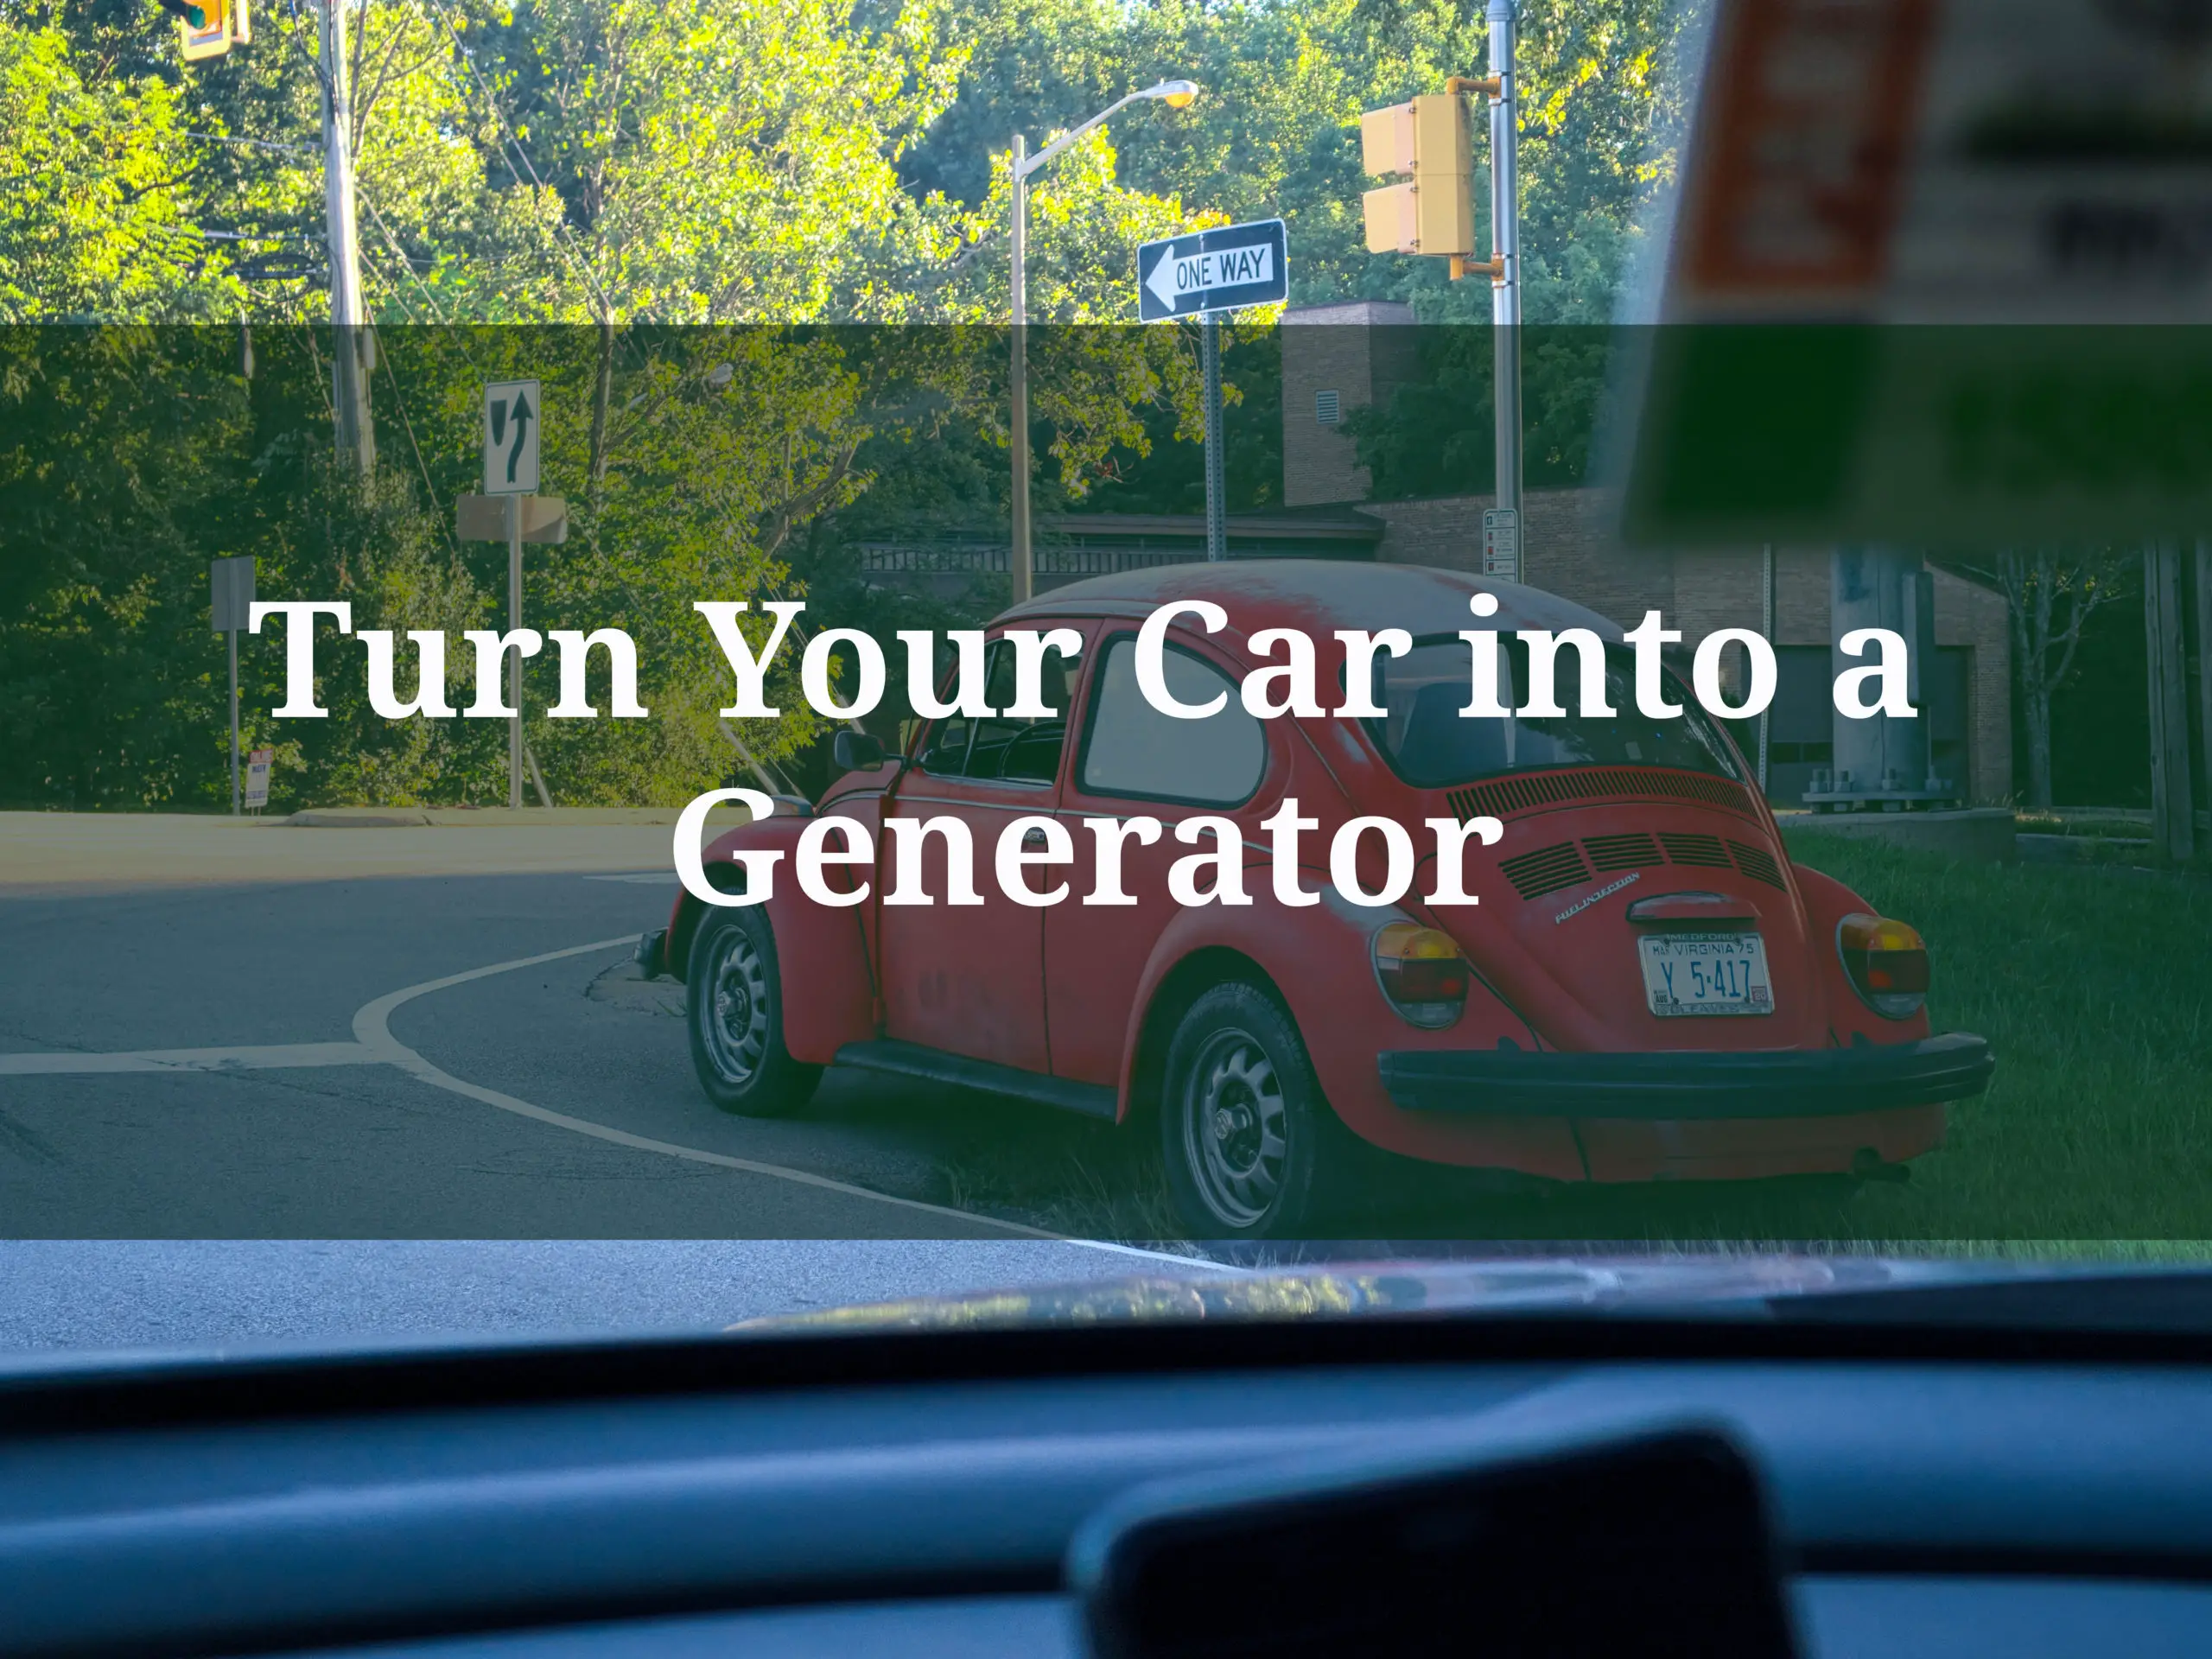 Illustration for article titled Turn Your Car into a Generator